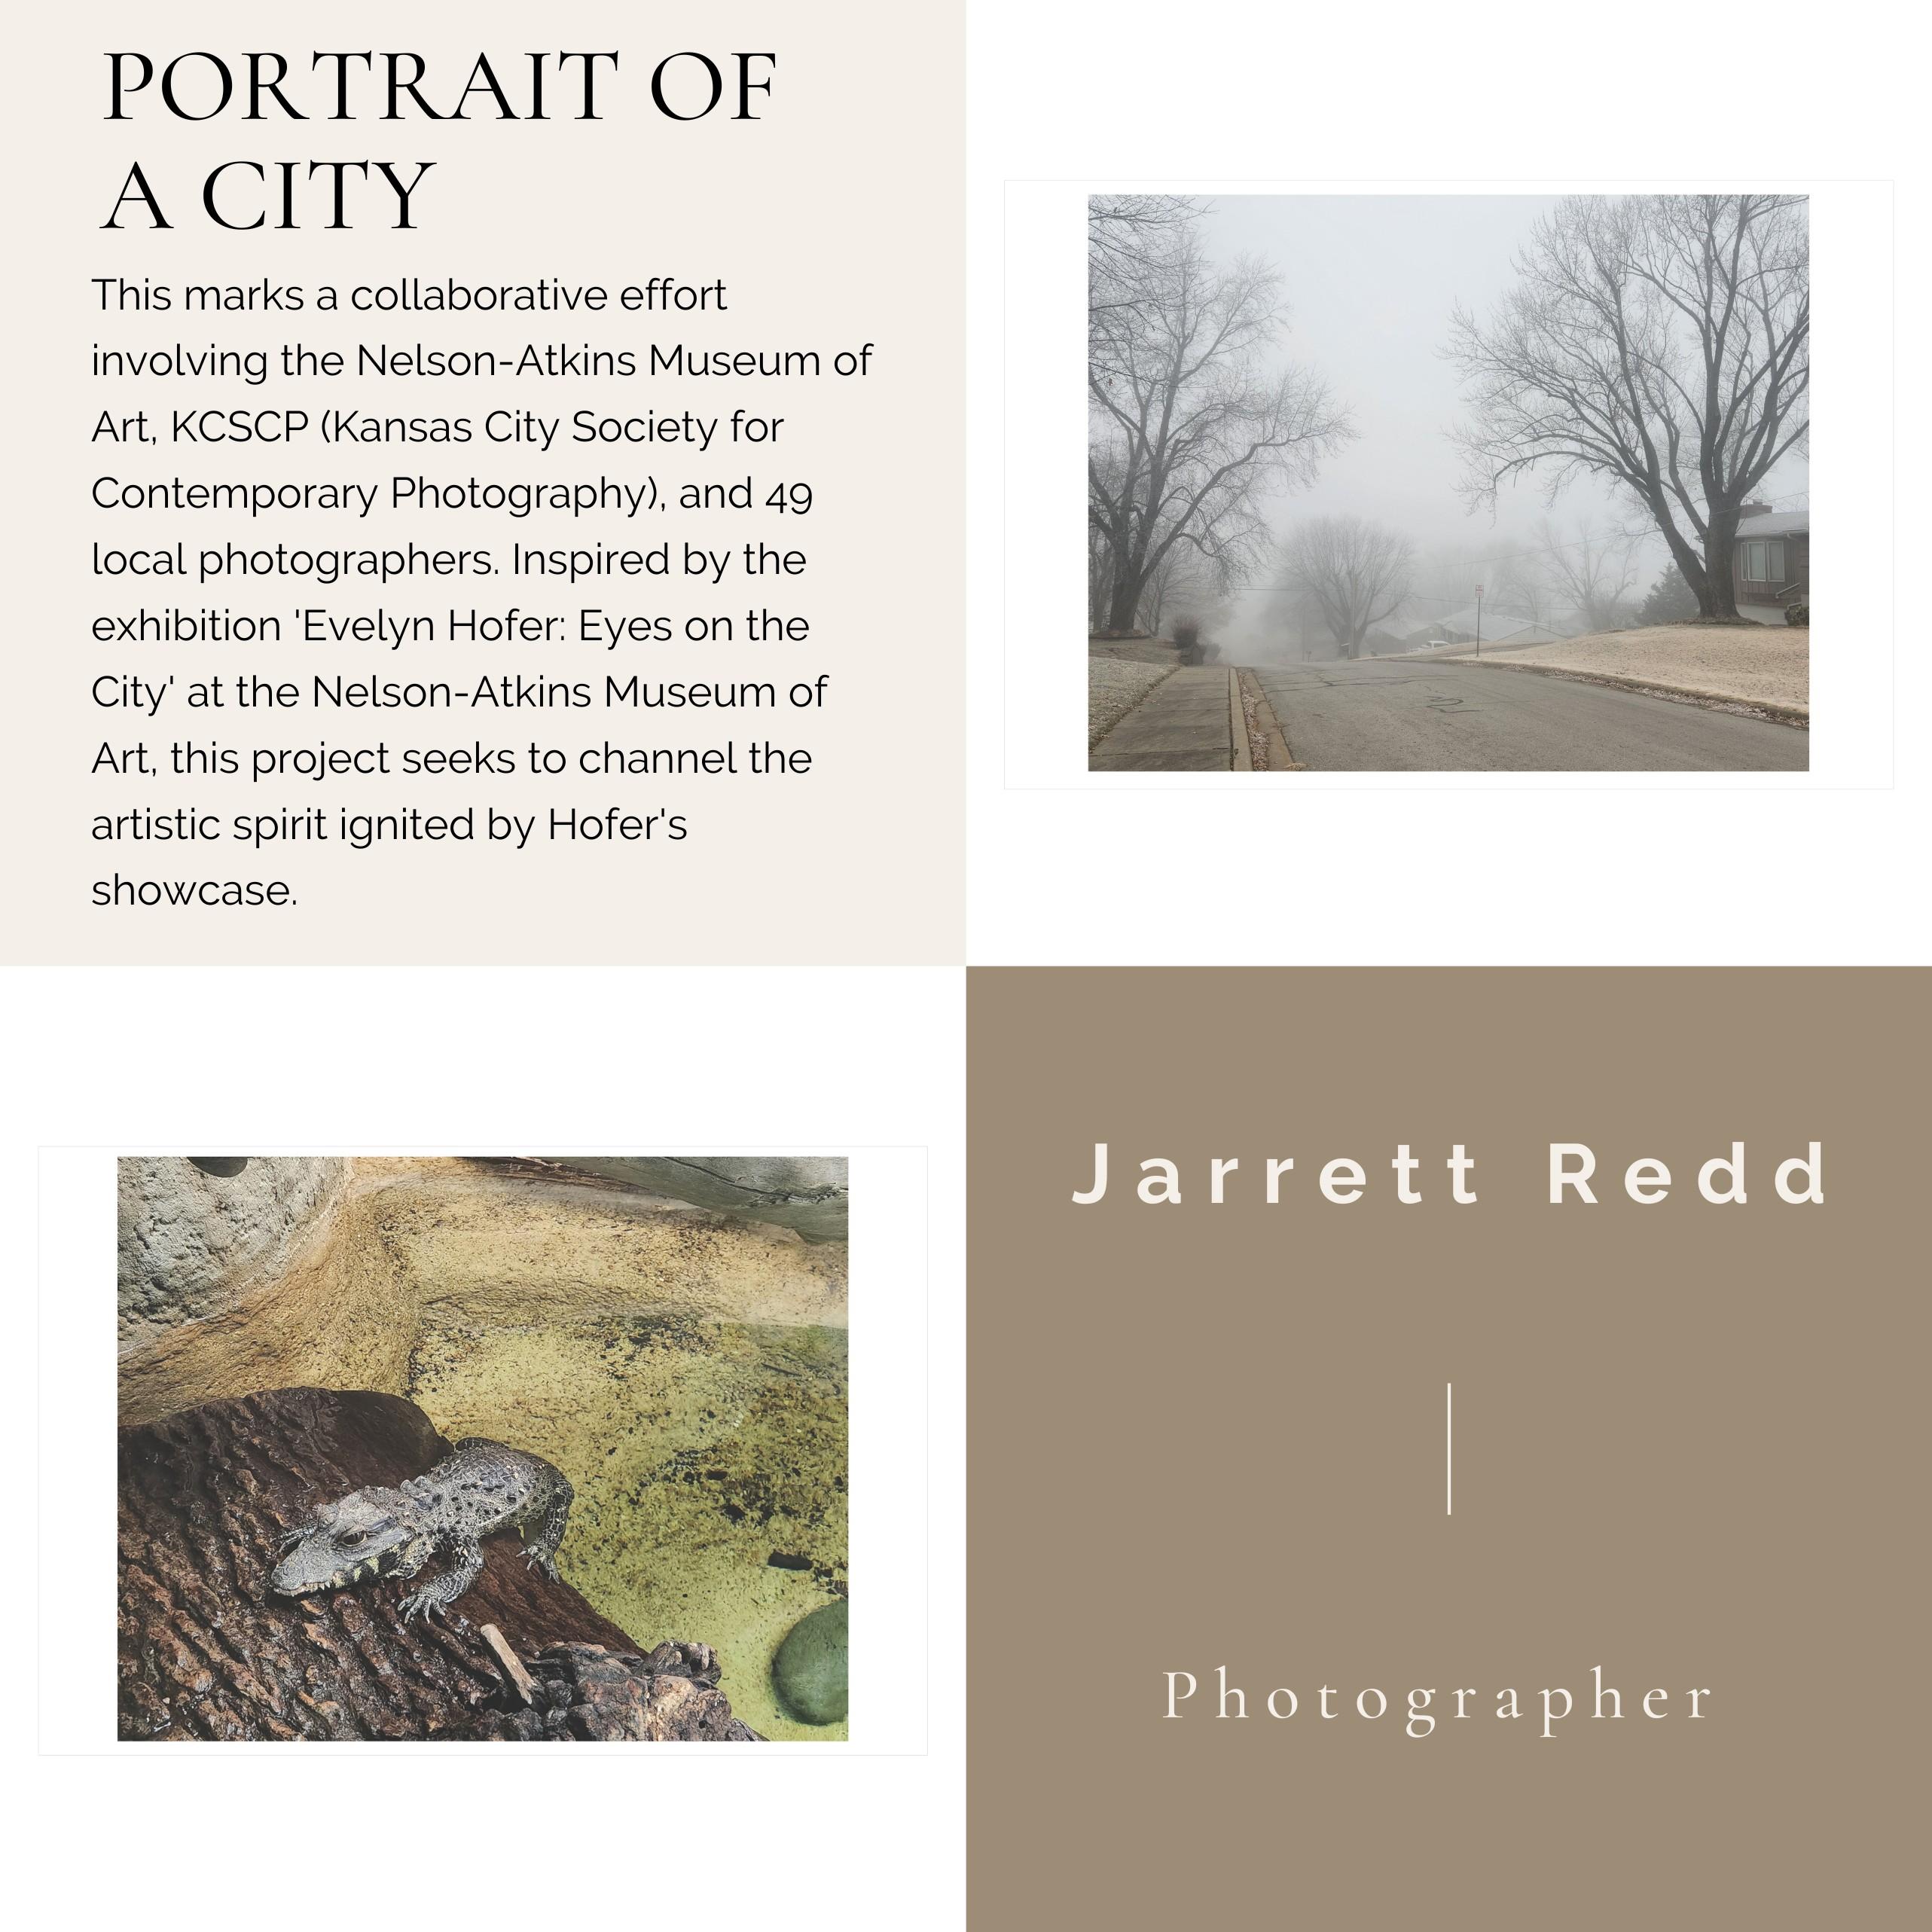 Jarrett Redd
Fog
Year: 2024
Archival Pigment Print on
Hahnemuehle Baryta Rag
Framed Size: 13 x 13 x 0.25 inches
COA provided

*Ready to hang; matted and framed in a minimal black frame made from composite wood with standard plex

From 